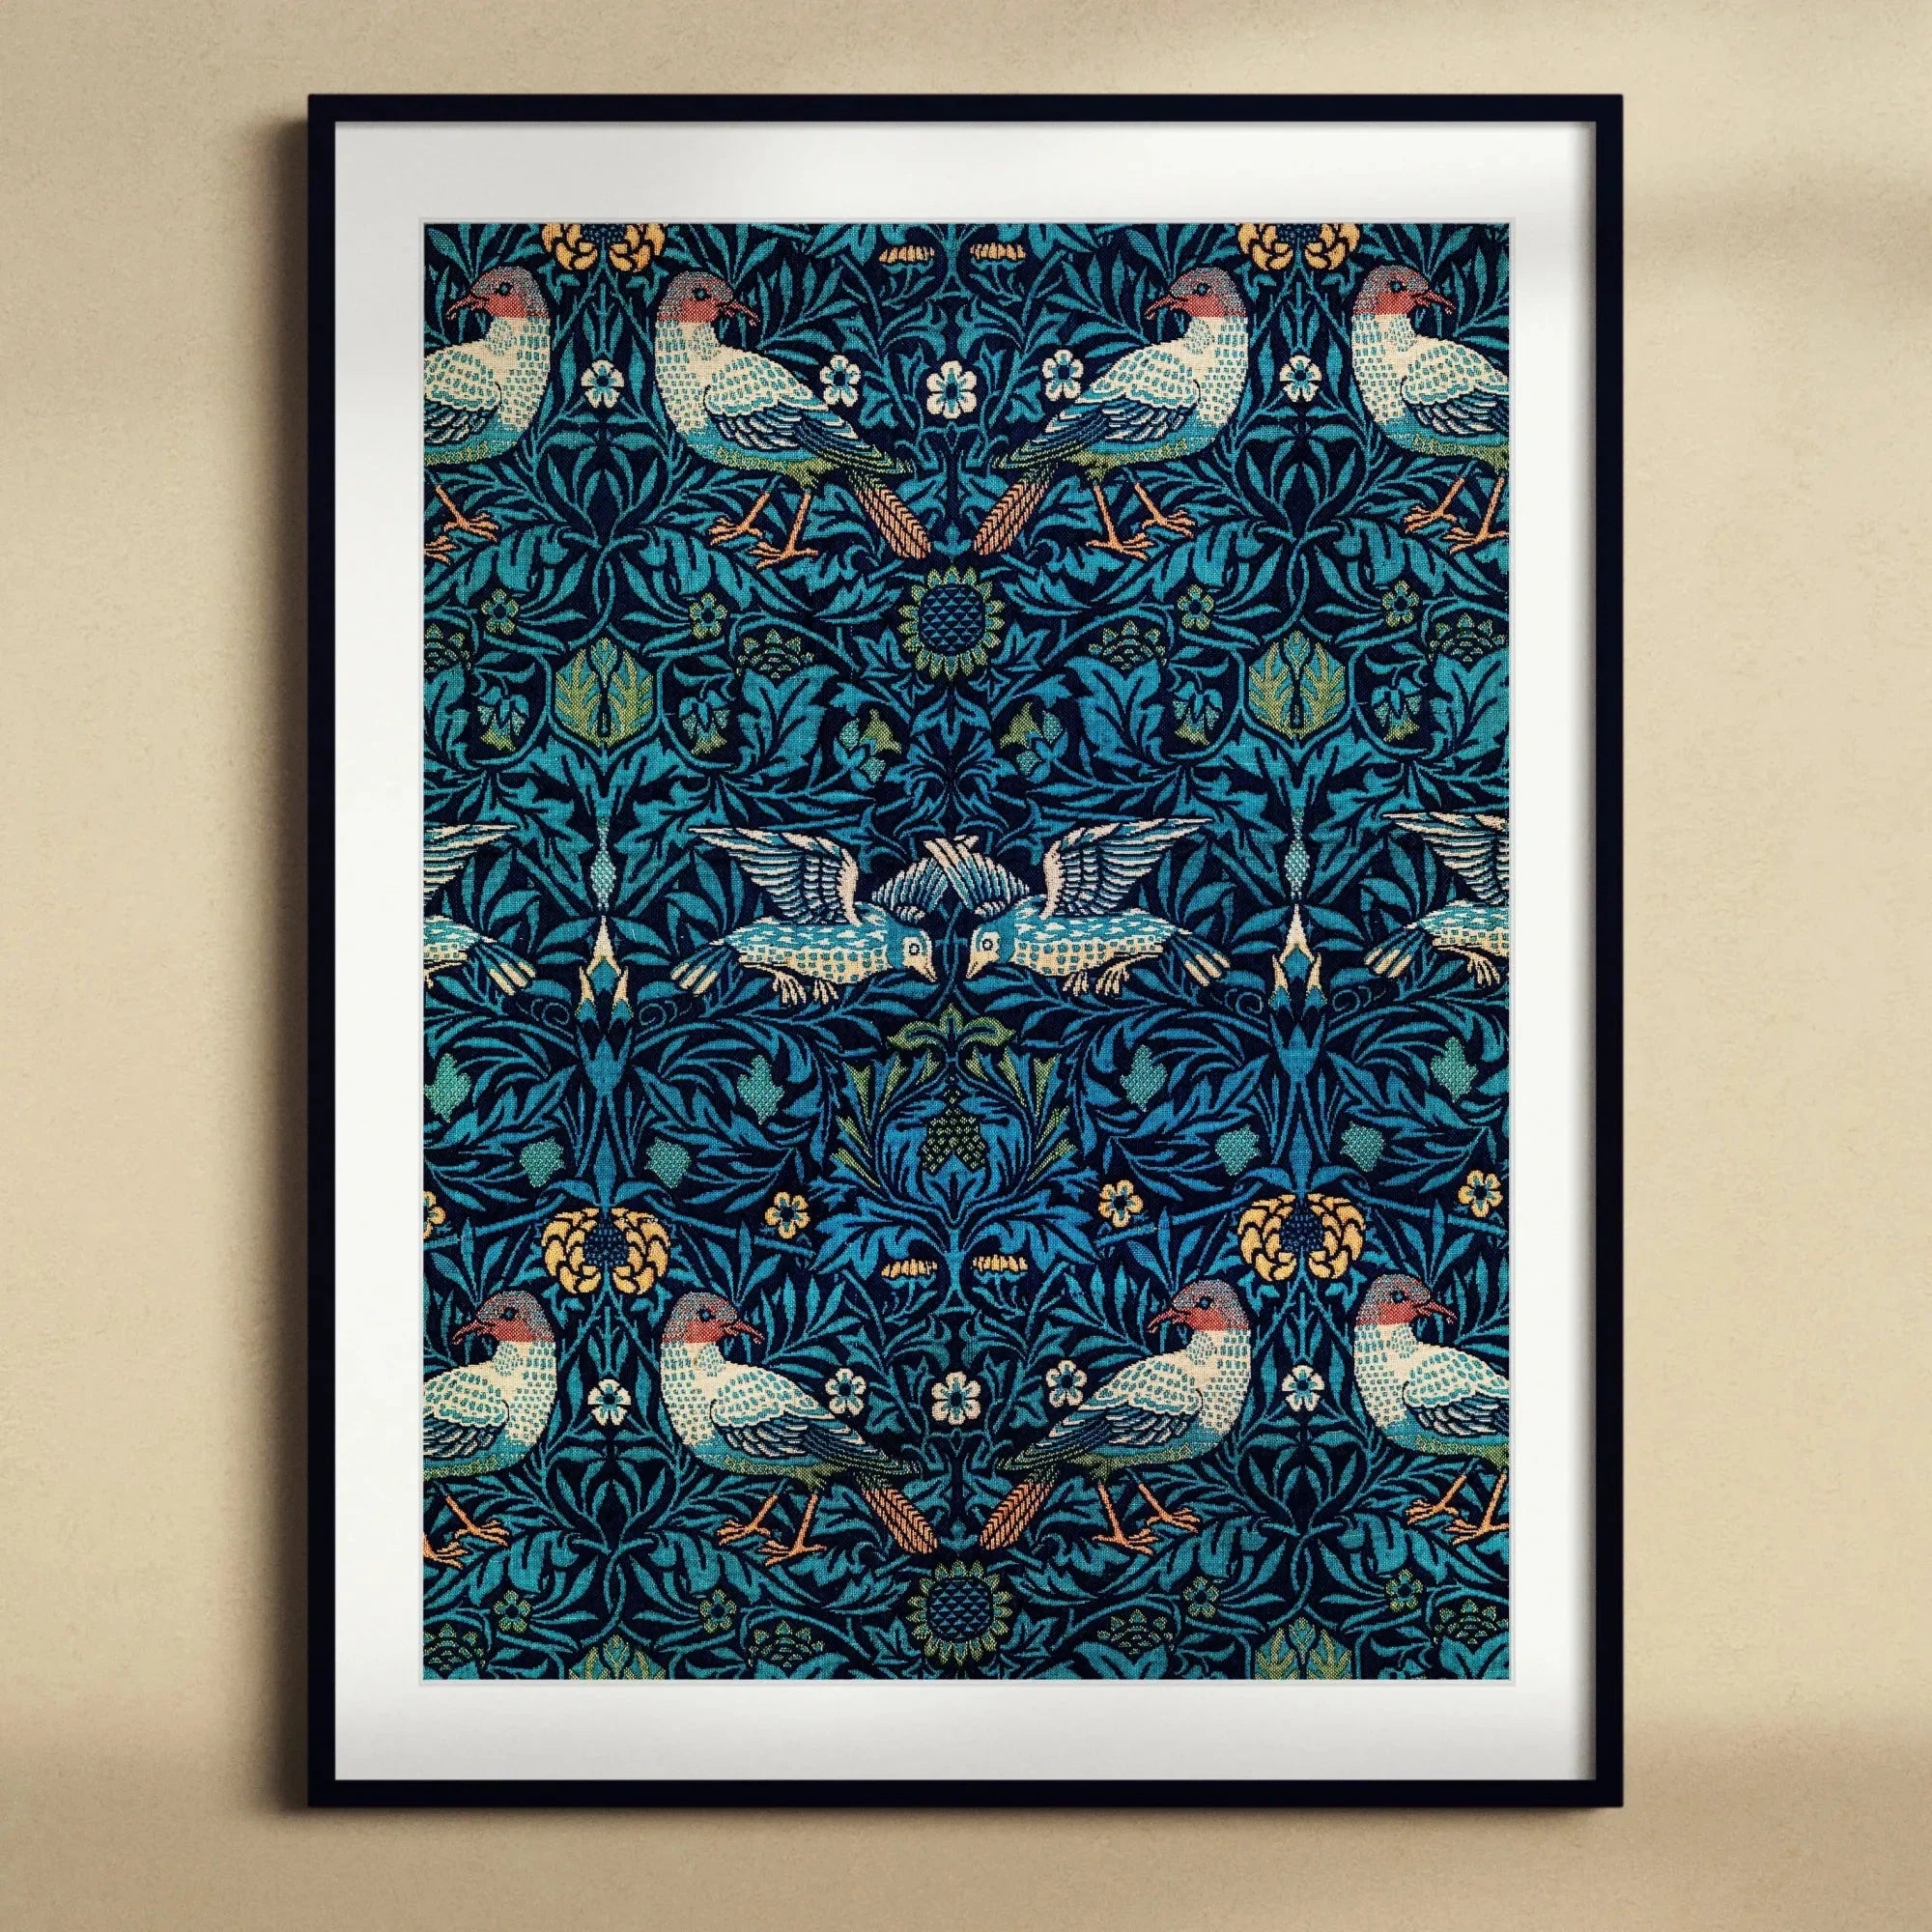 Birds By William Morris Framed & Mounted Print - Posters Prints & Visual Artwork - Aesthetic Art